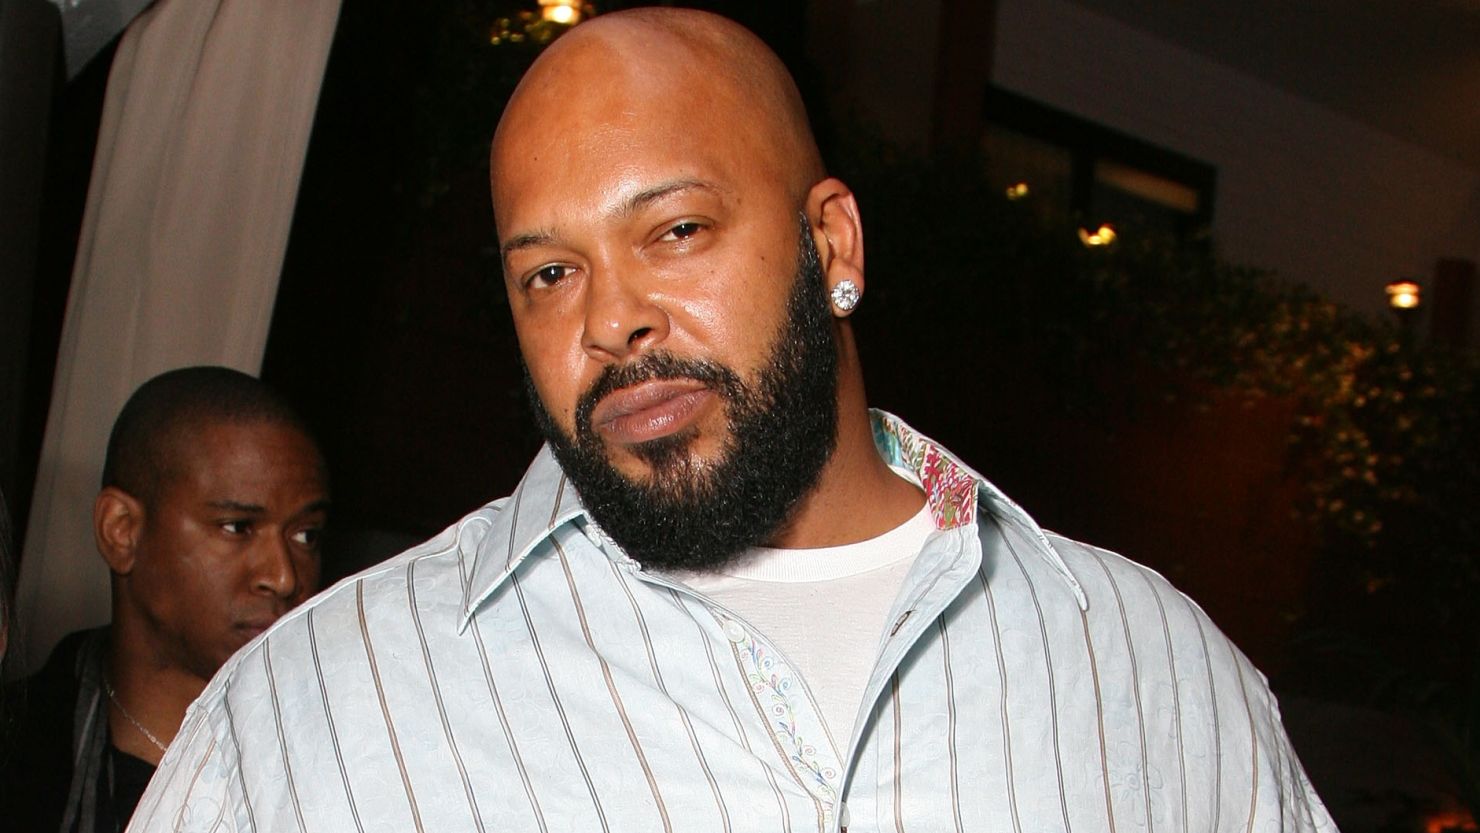 Suge Knight attending the after party for the BET Awards in June 2007.